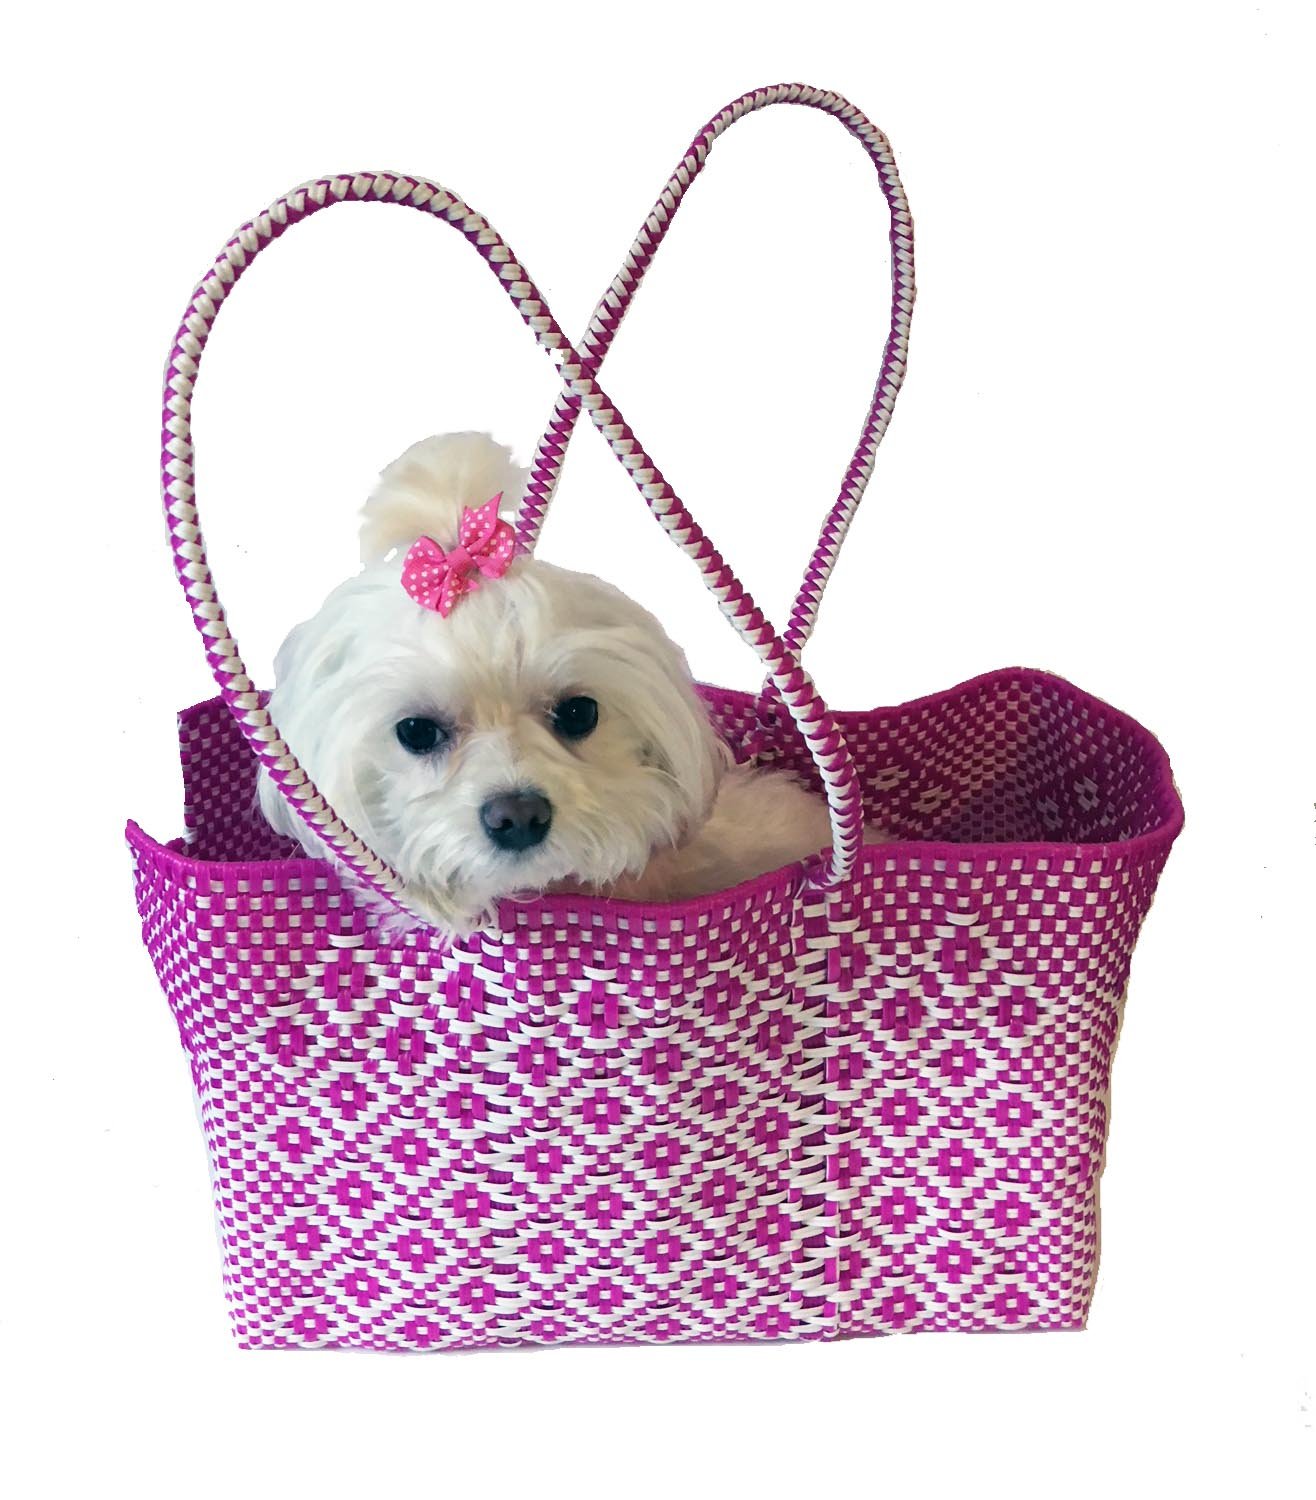 Dog Totes and Carriers